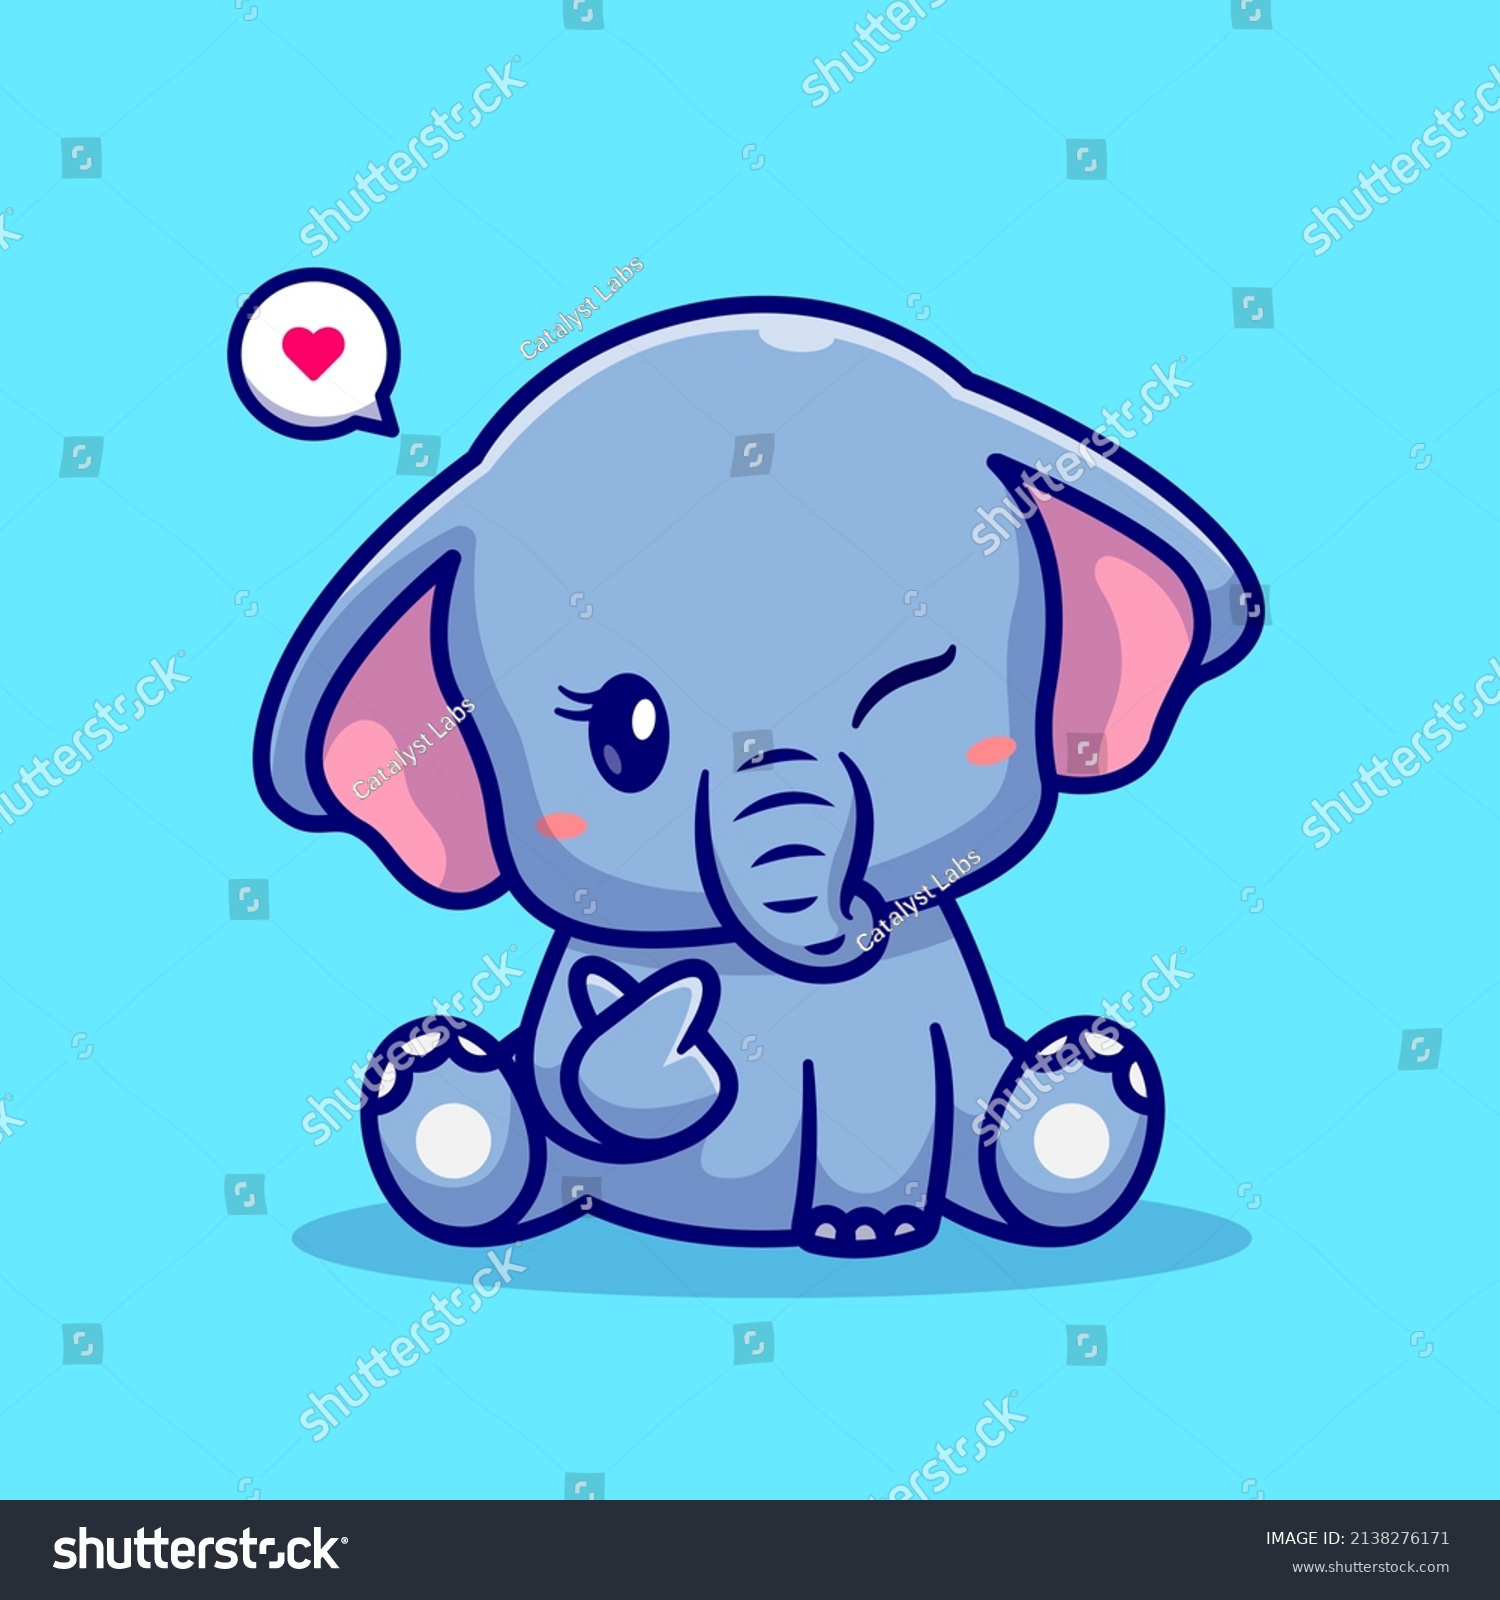 SVG of Cute Elephant With Love Sign Hand Cartoon Vector Icon Illustration. Animal Nature Icon Concept Isolated Premium Vector. Flat Cartoon Style svg